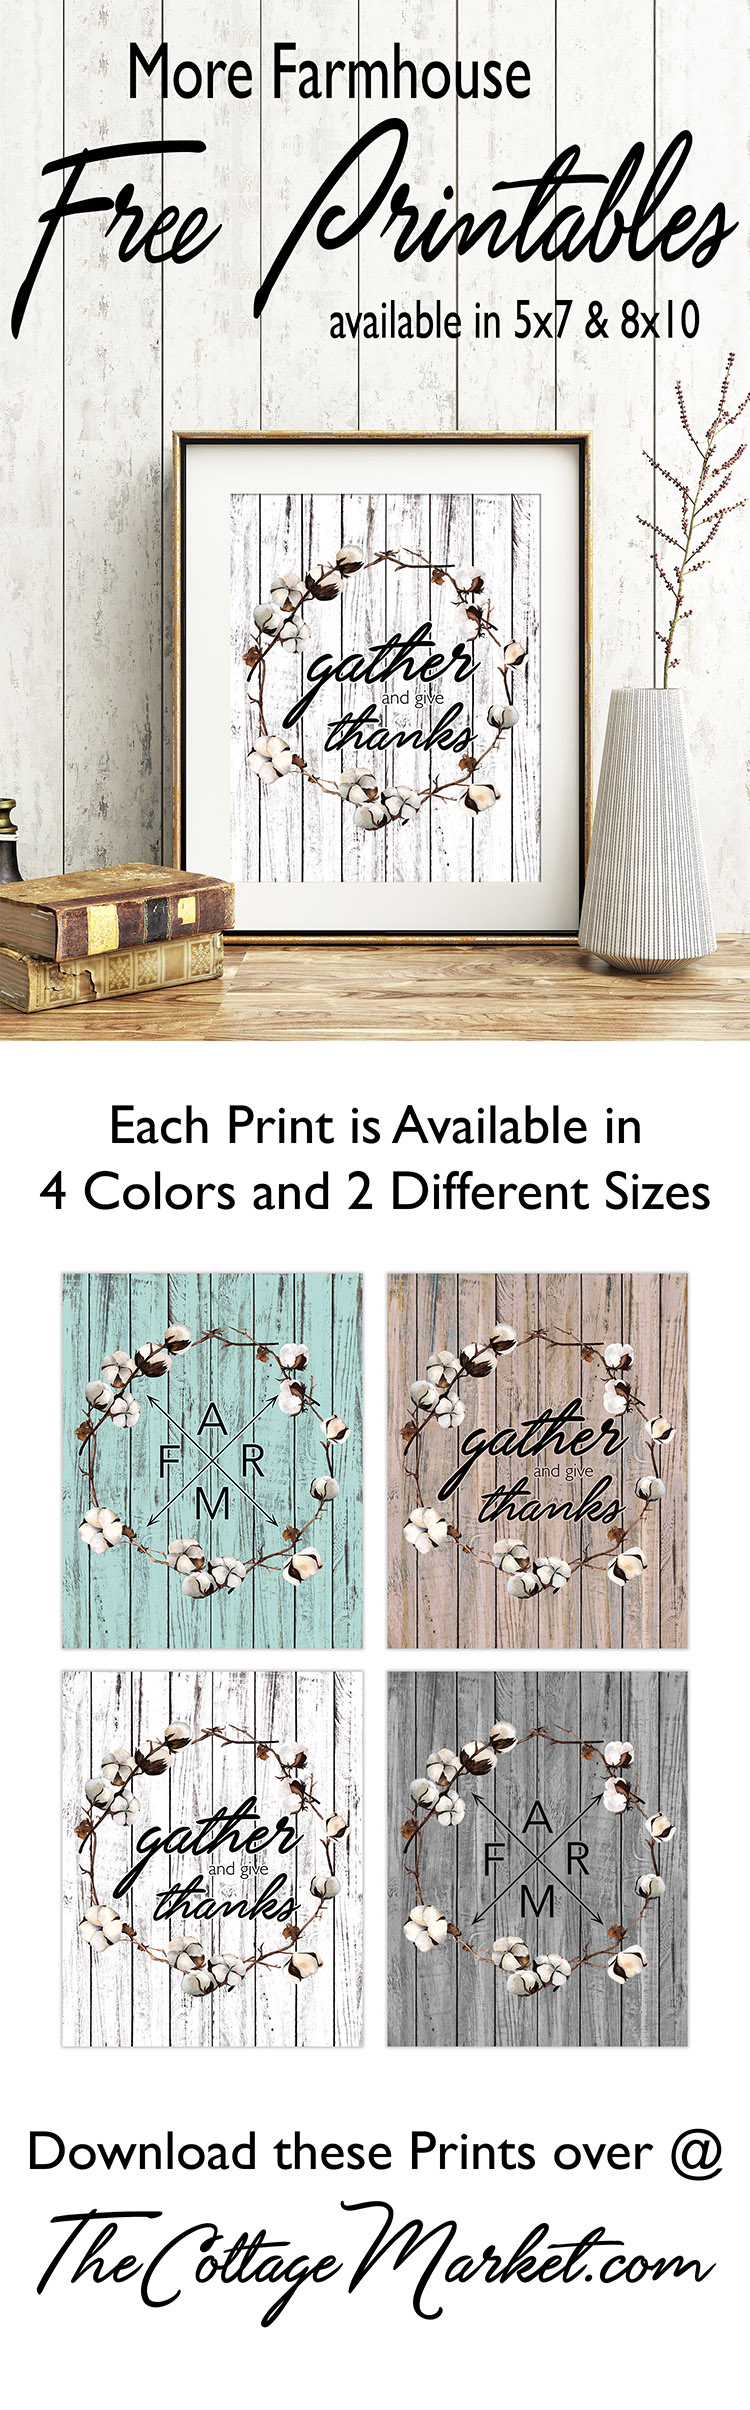 The Best Free Printable Farmhouse Wall Art Prints are here for you to check out and choose. There are so many options you won't know where to start! Enjoy!